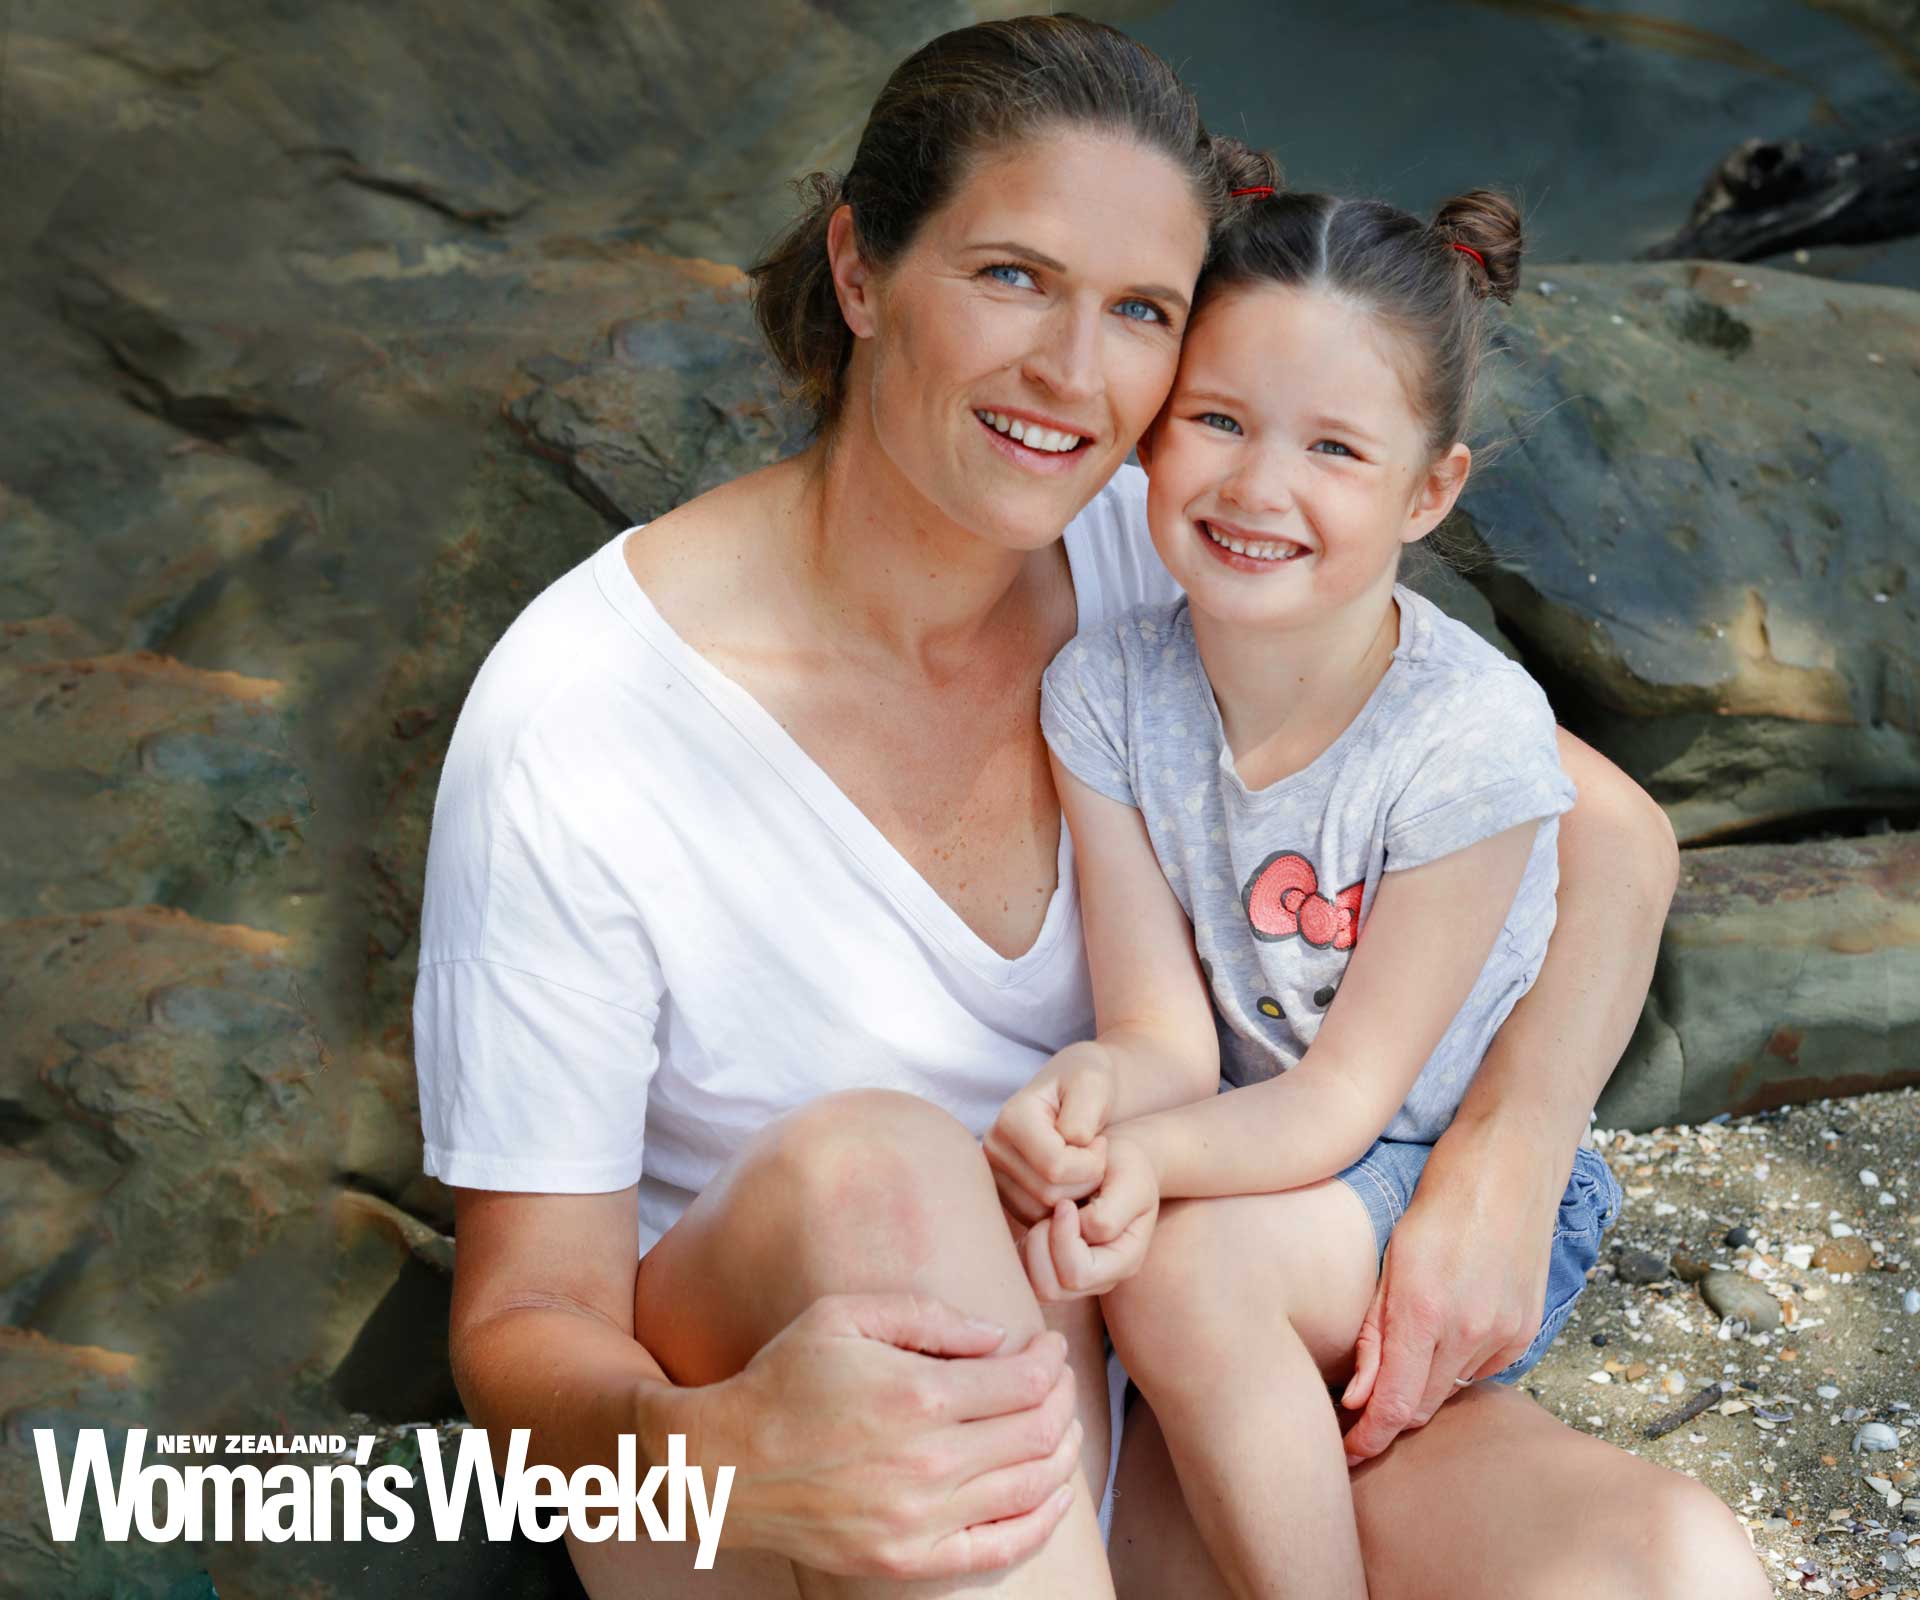 Mum’s life-saving lesson: why water safety is so important for kids